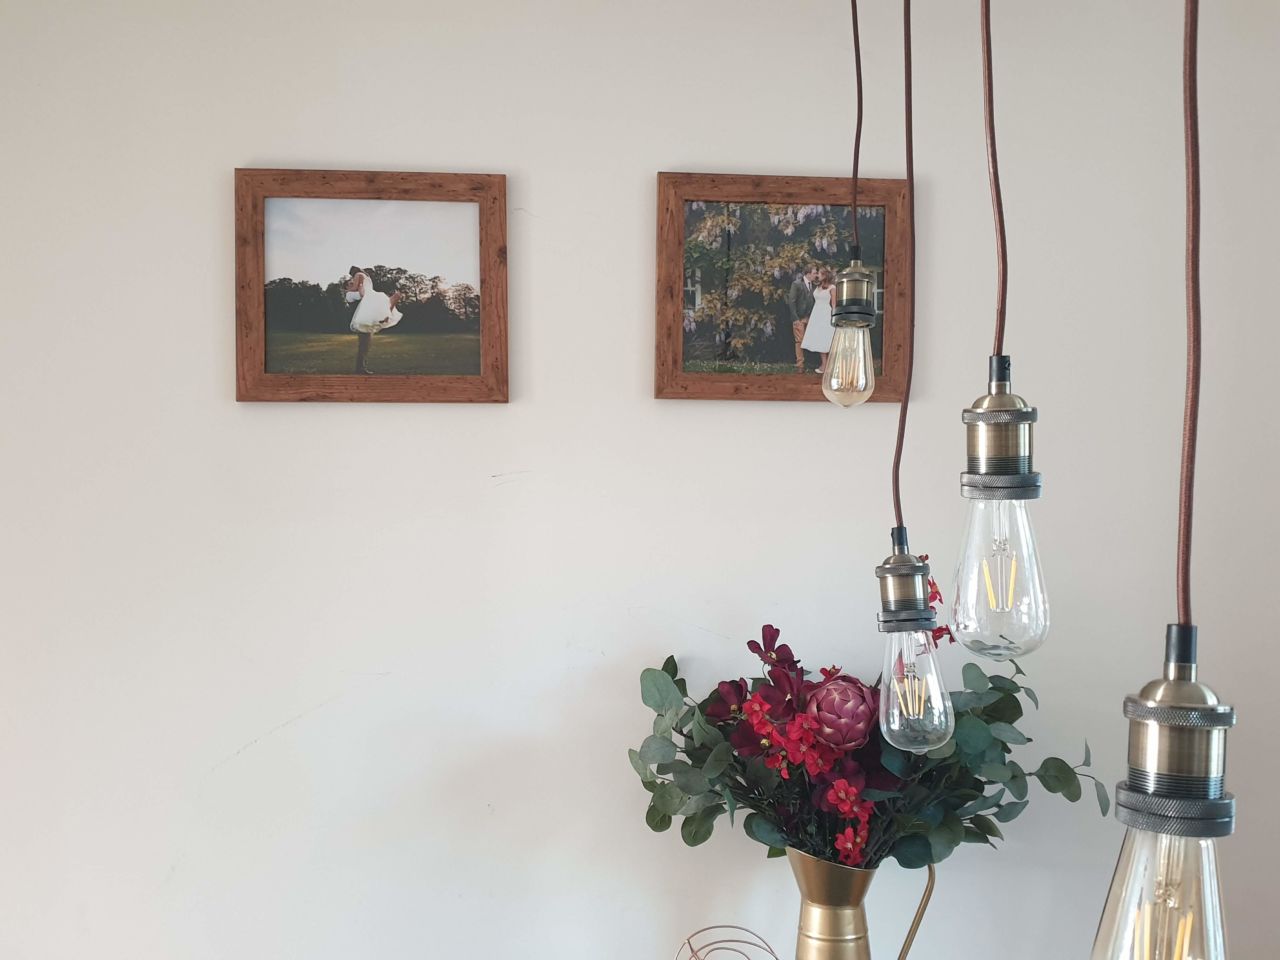 Gallery wall with wedding photos